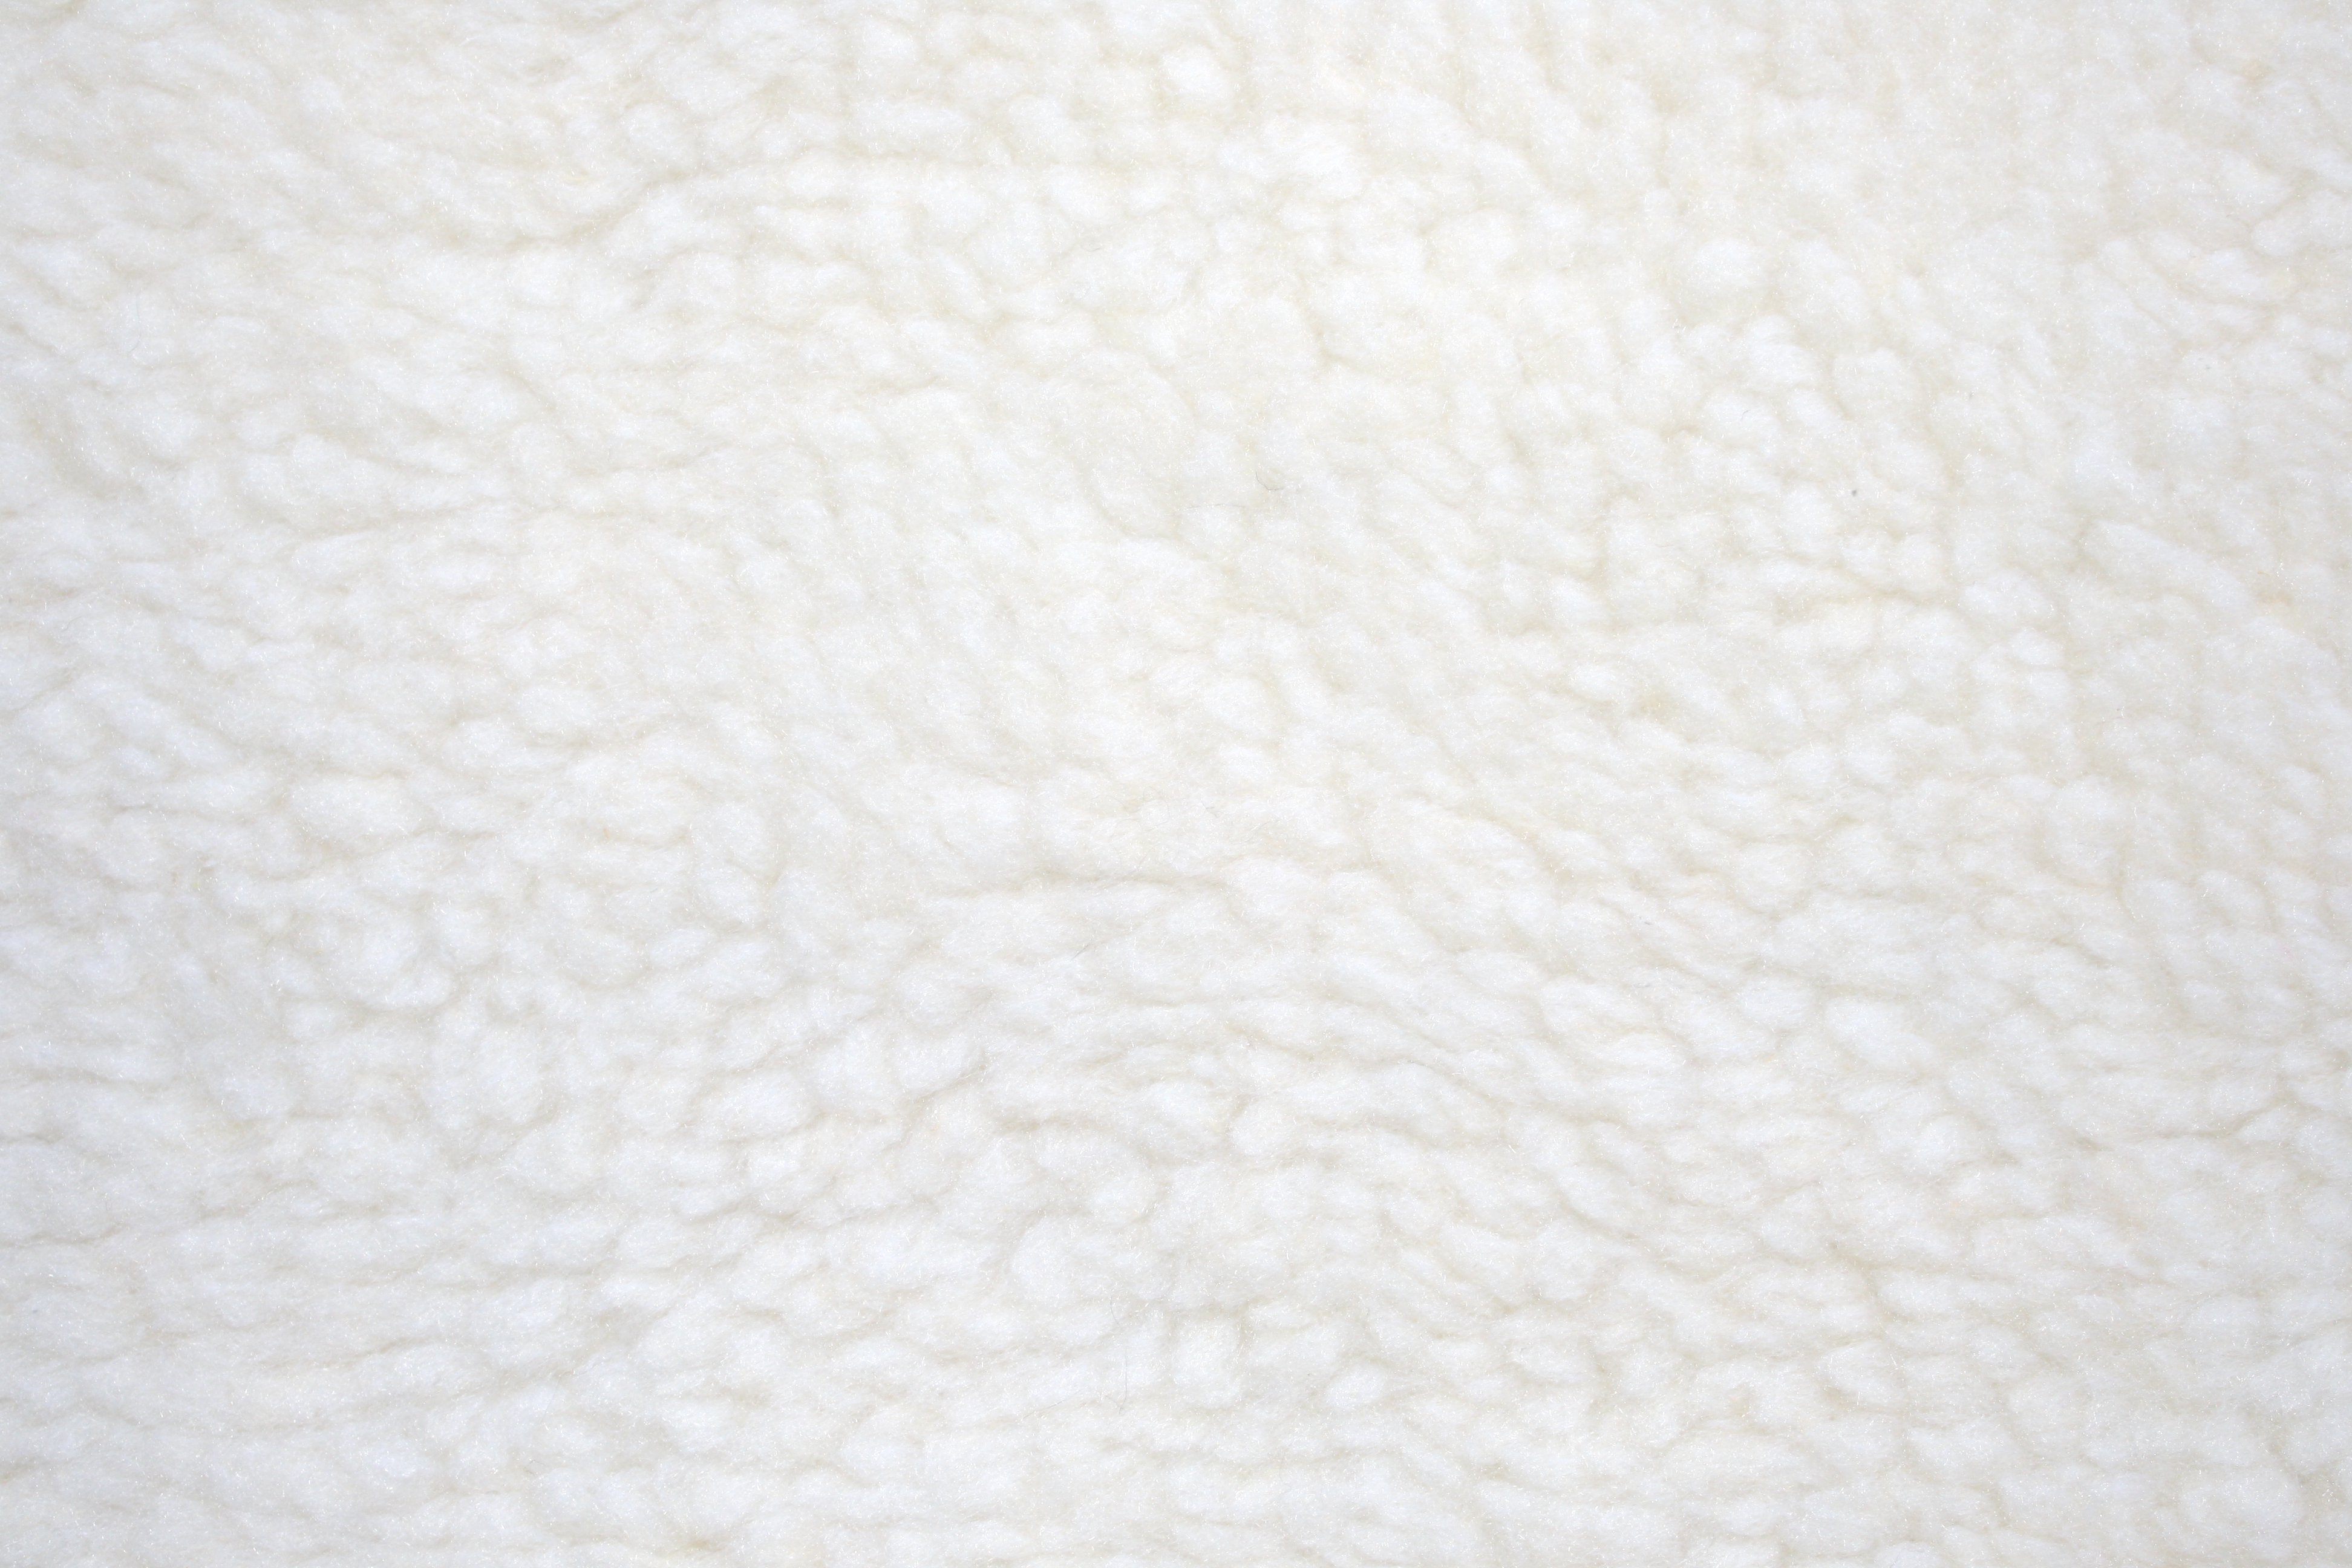 Fleece Faux Sherpa Wool Fabric Texture Natural Cream Picture | Free ...